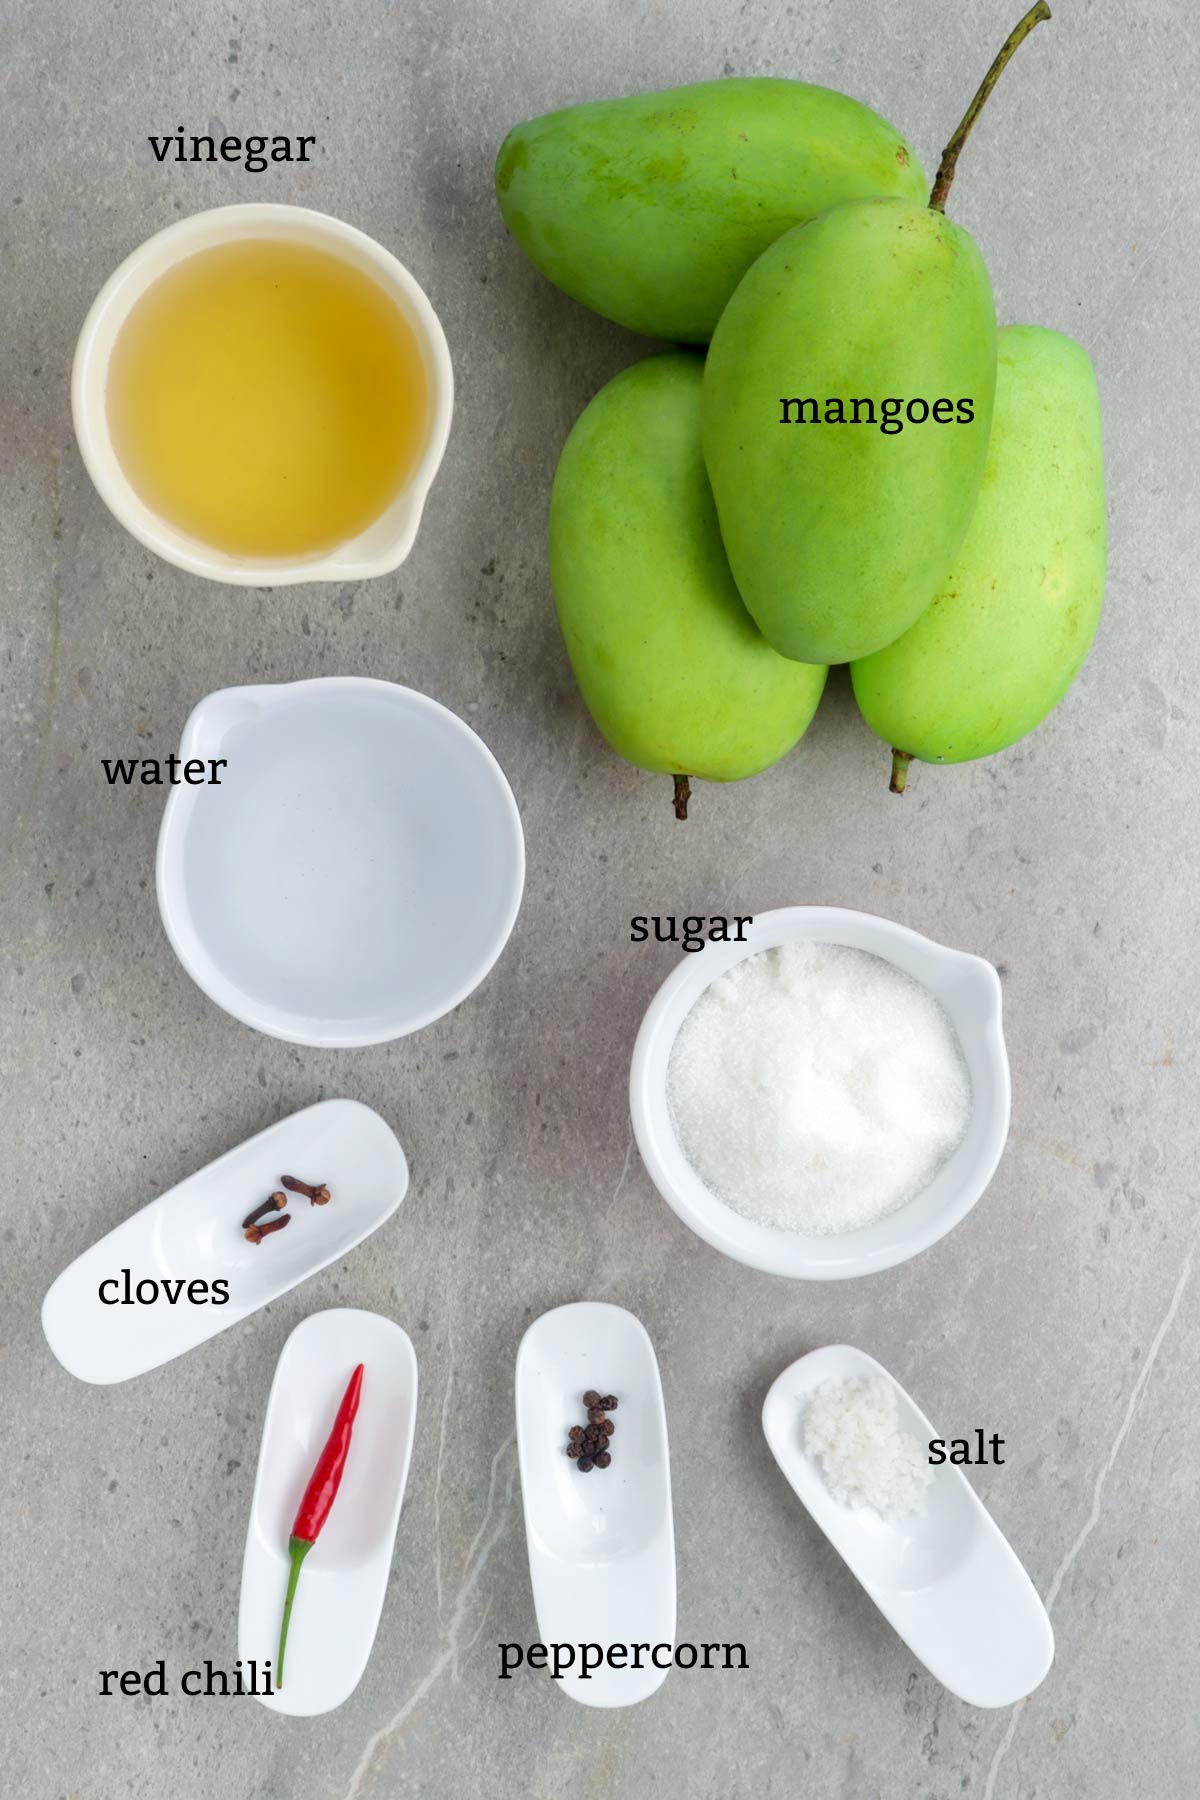 Ingredients for Pickled Mango.